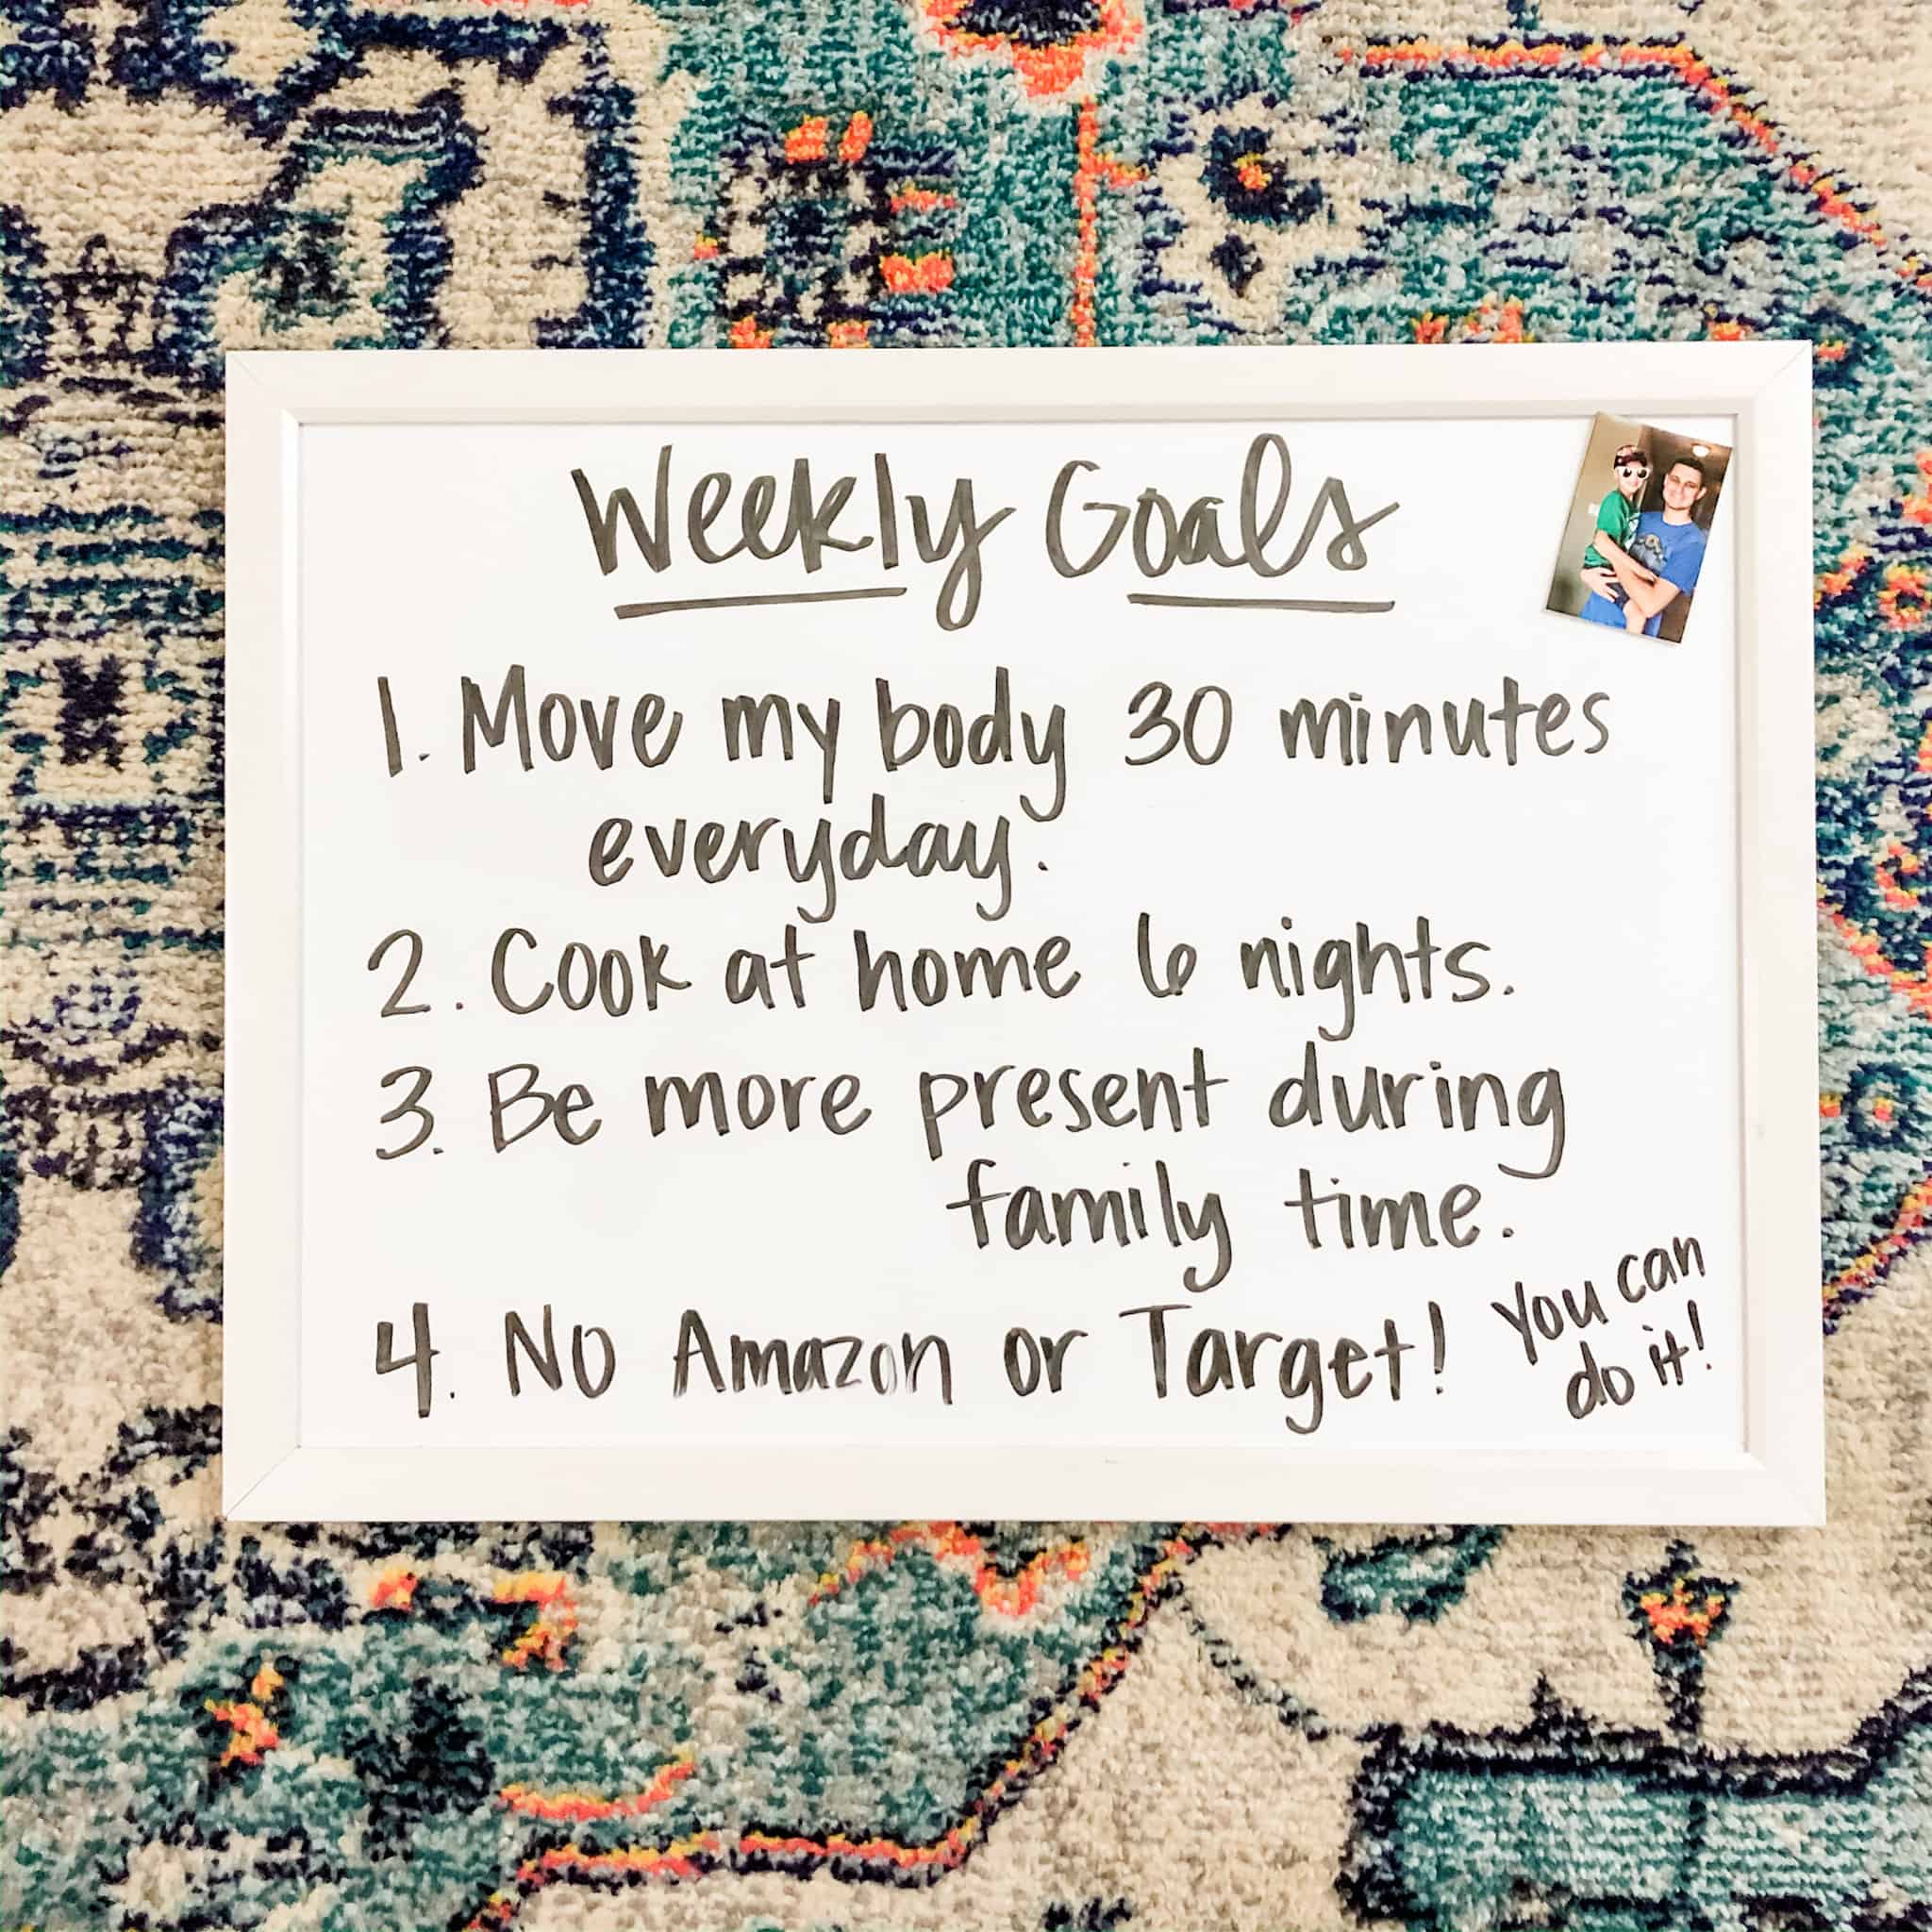 Set weekly goals to help you stop impulse spending on your credit card